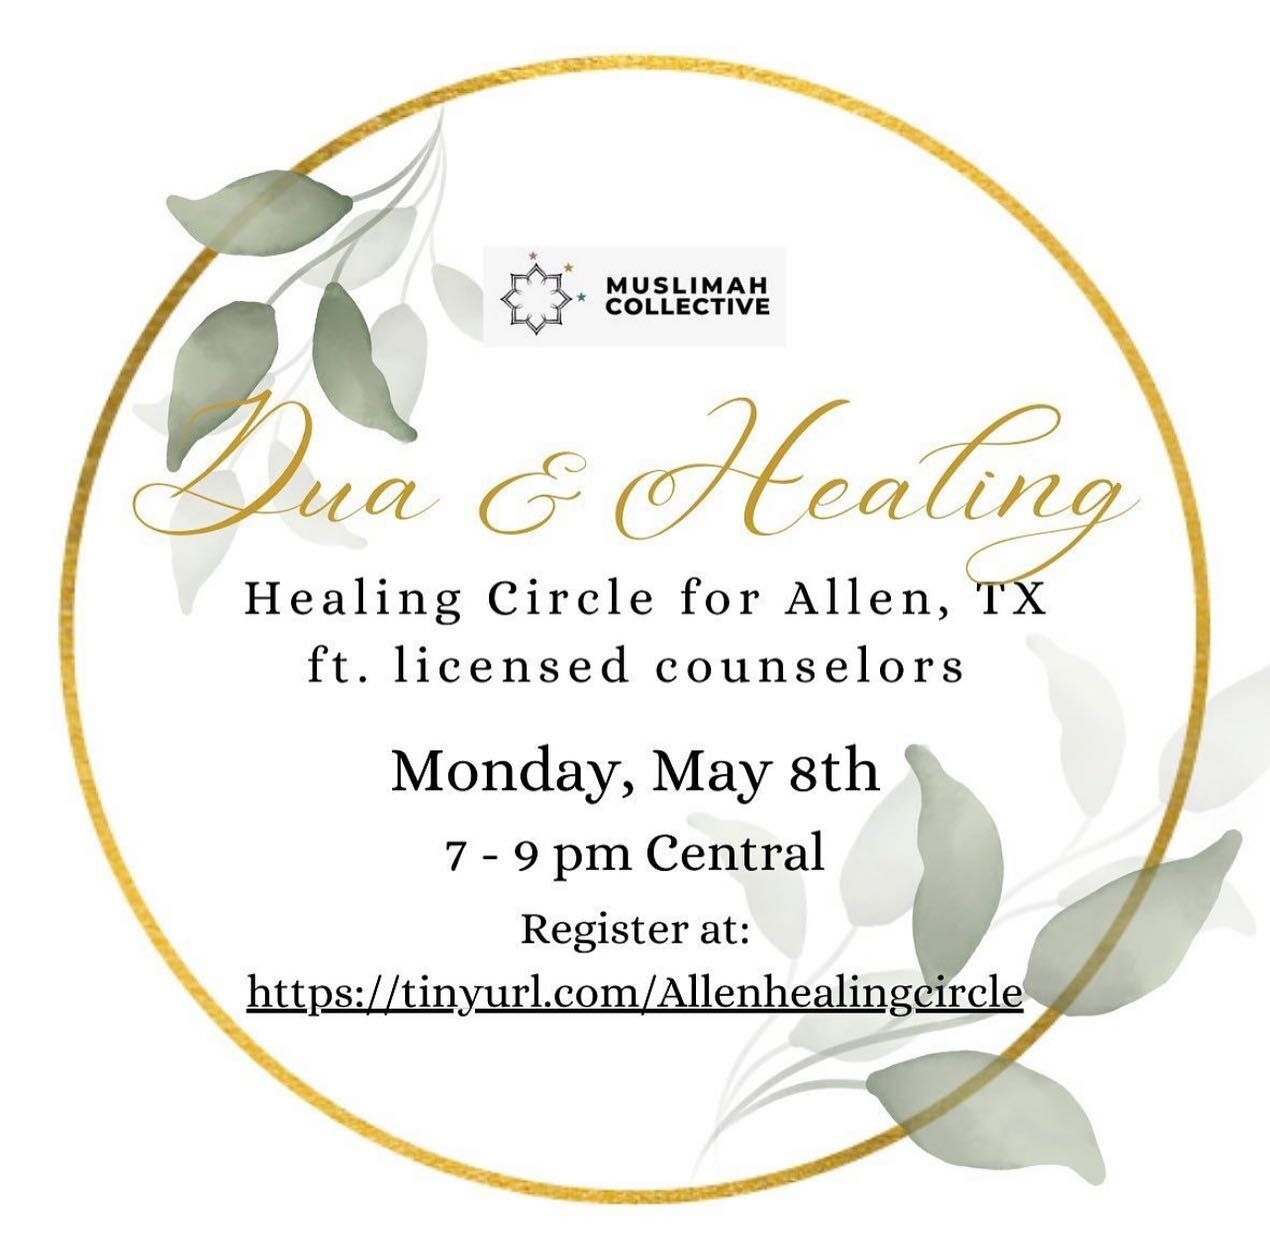 Healing circle with MAPS DFW therapists tonight in response to the incident in Allen, Texas. Please share widely and encourage others to attend! 

https://tinyurl.com/Allenhealingcircle